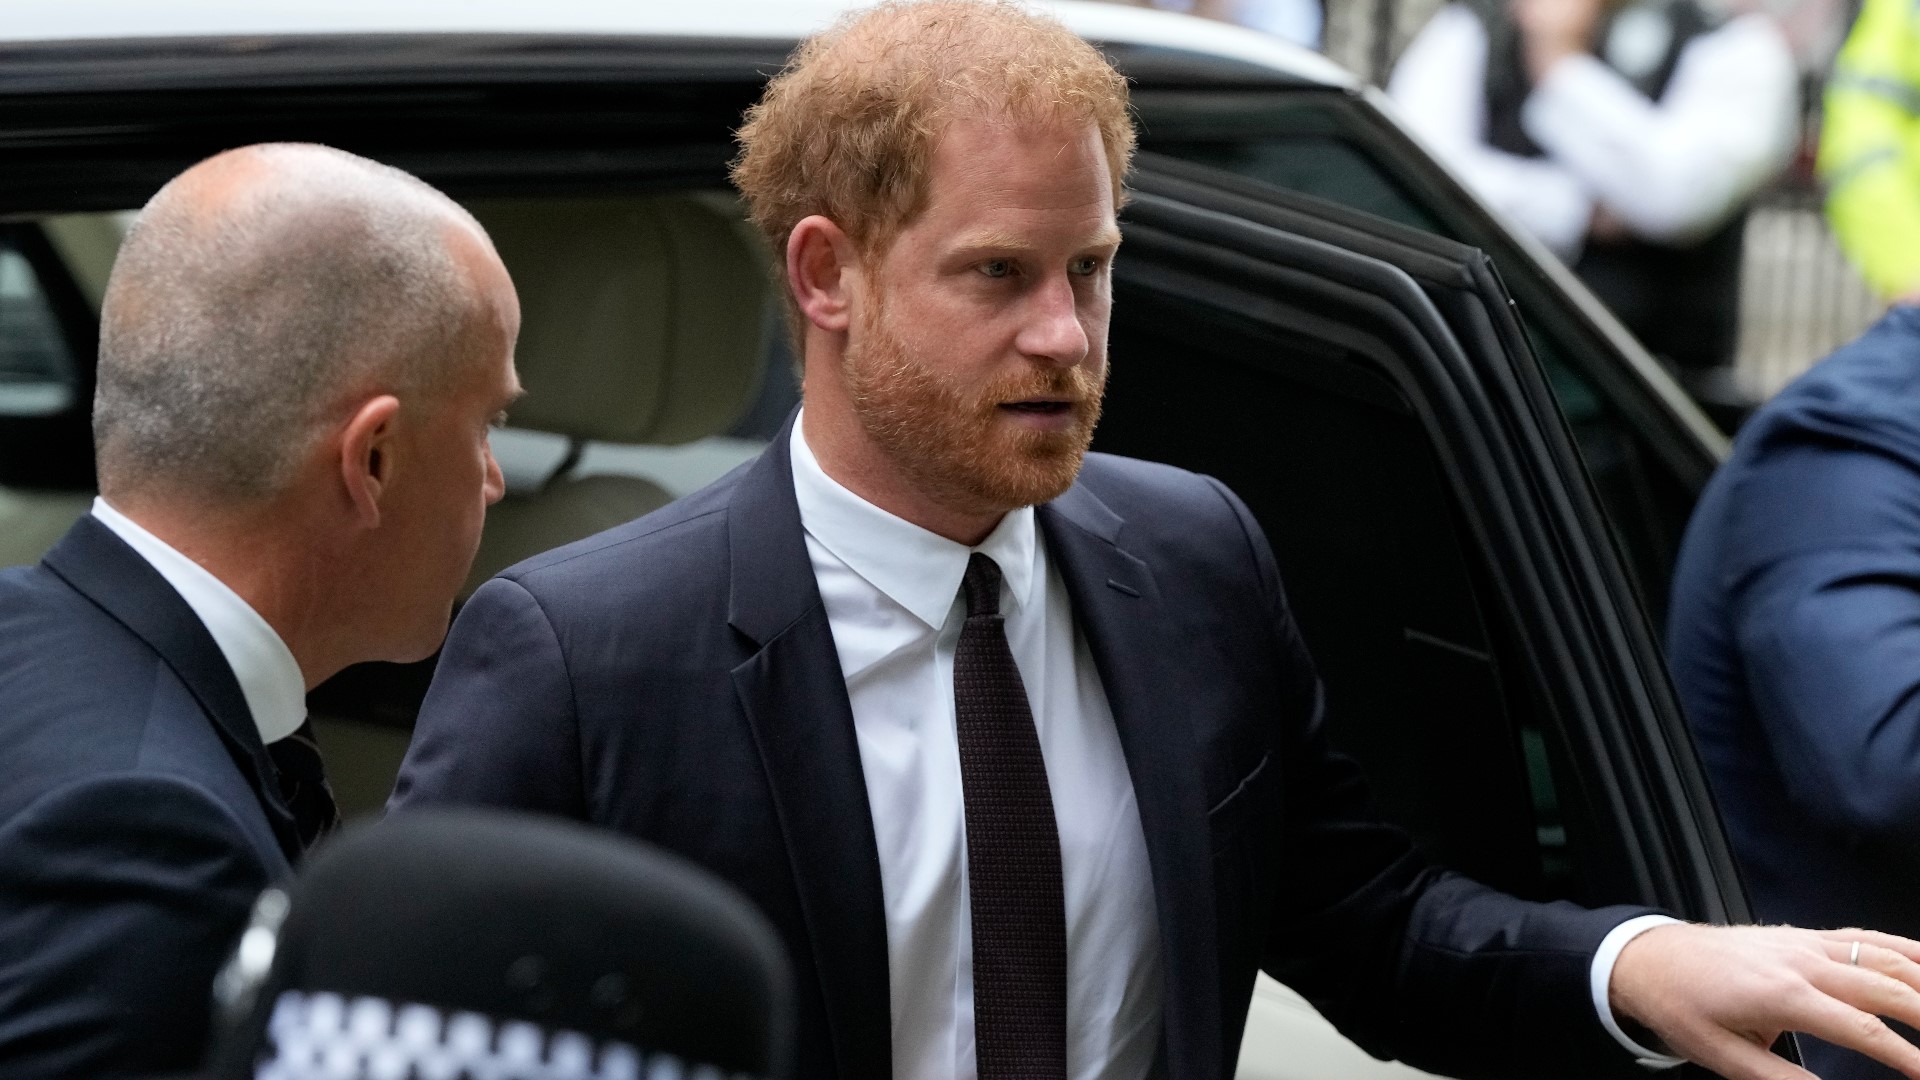 Prince Harry is set to testify against a tabloid publisher, actor Cuba Gooding Jr. faces a civil trial, and Hollywood actors voted to authorize a strike.